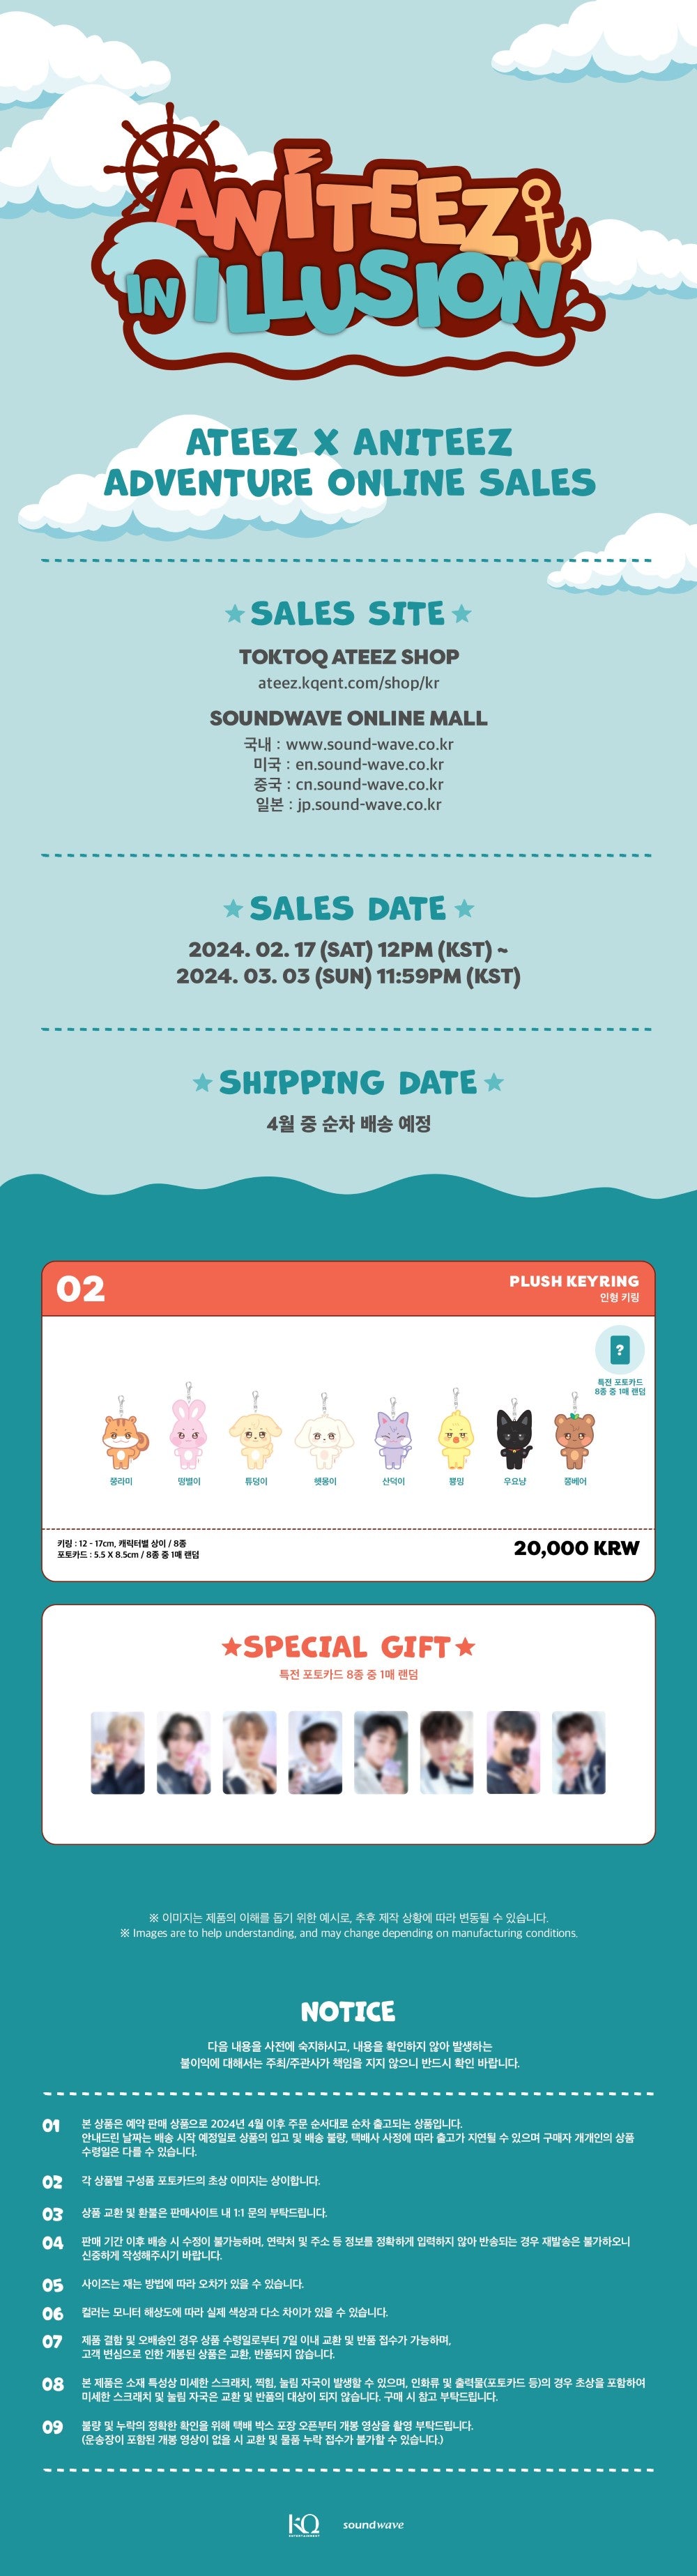 [PRE-ORDER] ATEEZ - Plush Keyring [ANITEEZ IN ILLUSION Official MD]